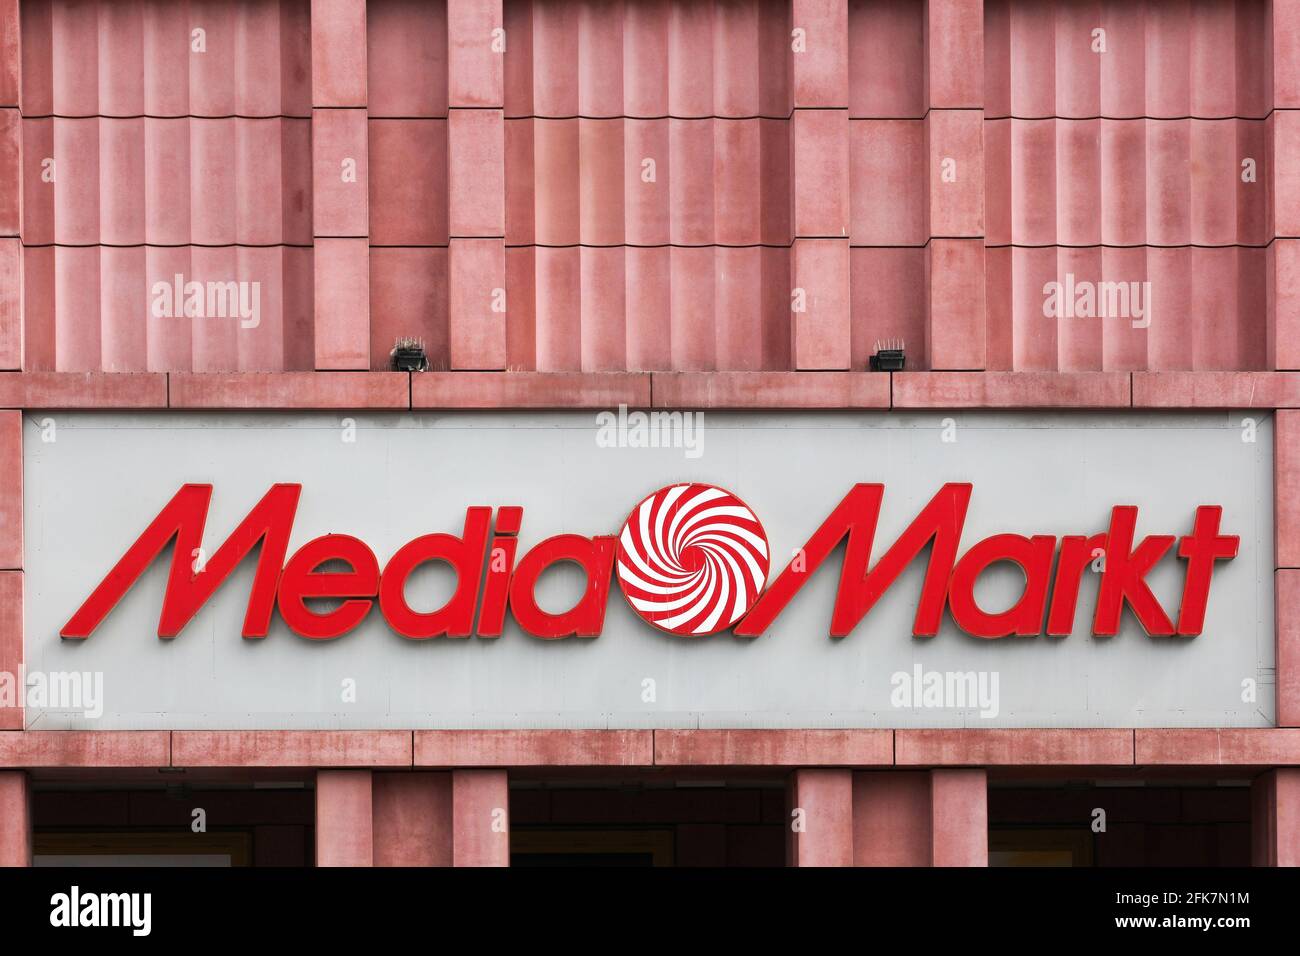 Berlin, Germany - July 12, 2020: Media Markt logo on a building. Media Markt is a German chain of stores selling consumer electronics Stock Photo